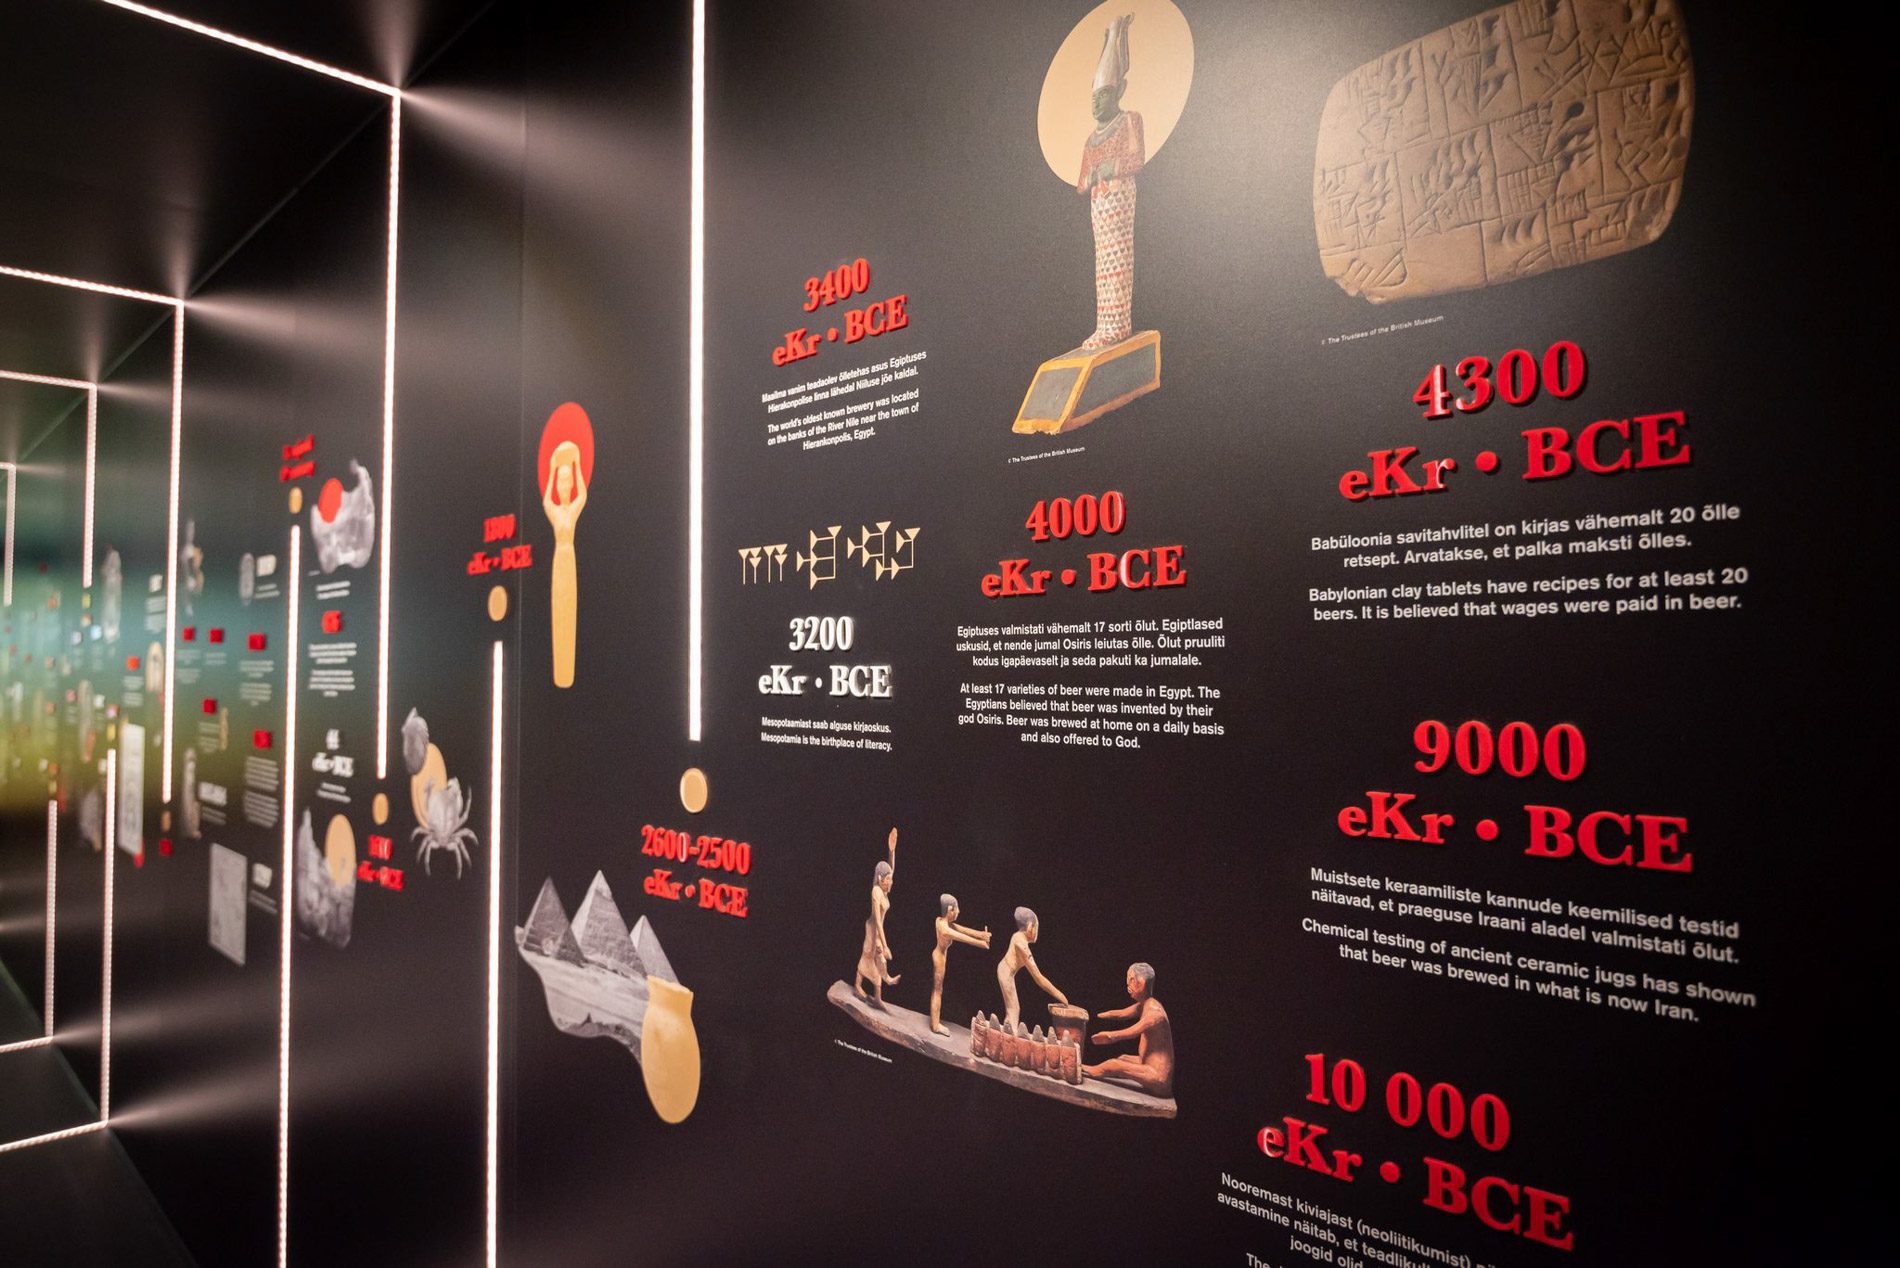 A new experience centre called The World of Beer, located at the famous A. Le Coq beer factory in Tartu, tells the story of beer culture as well as the history of the legendary brewery.